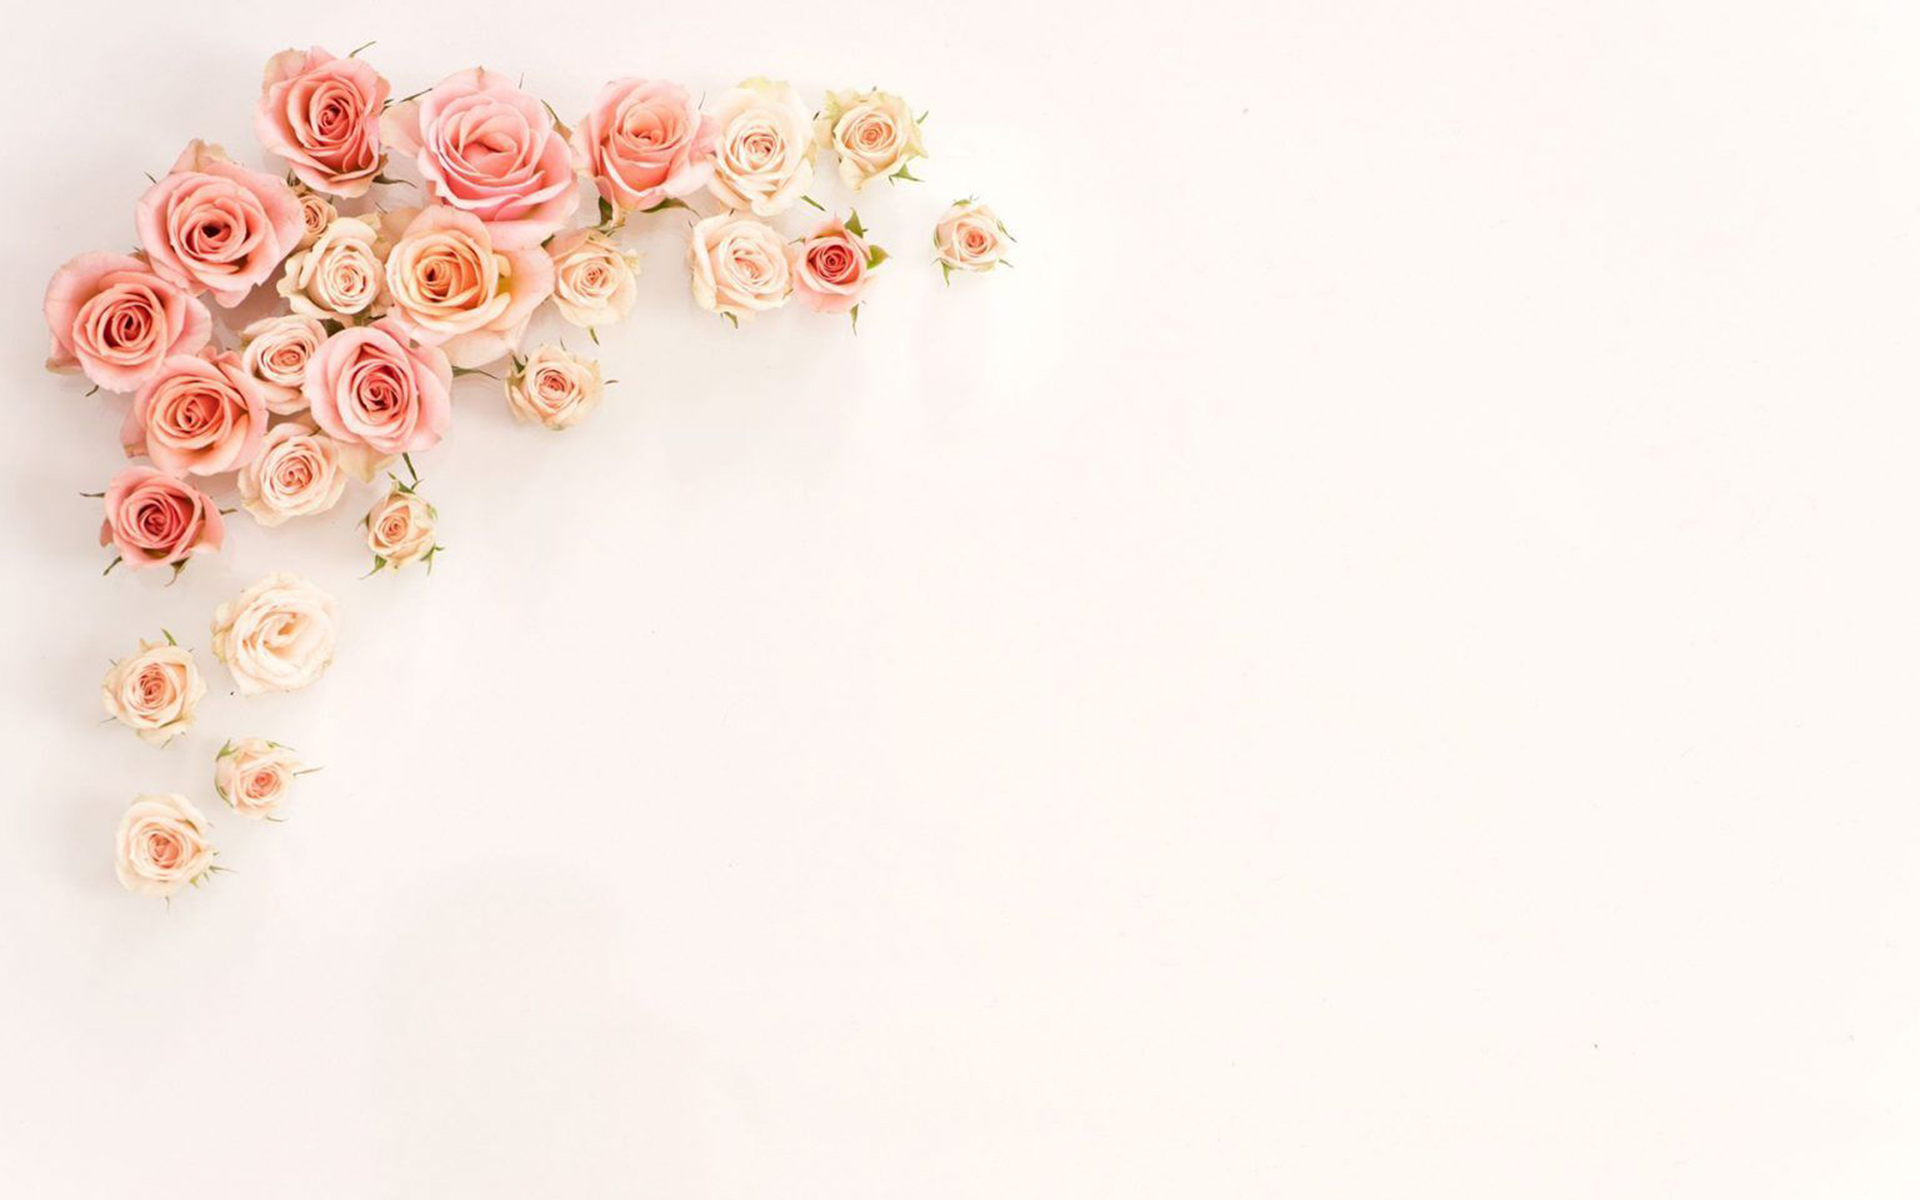 Aesthetic Rose Gold Cute Backgrounds